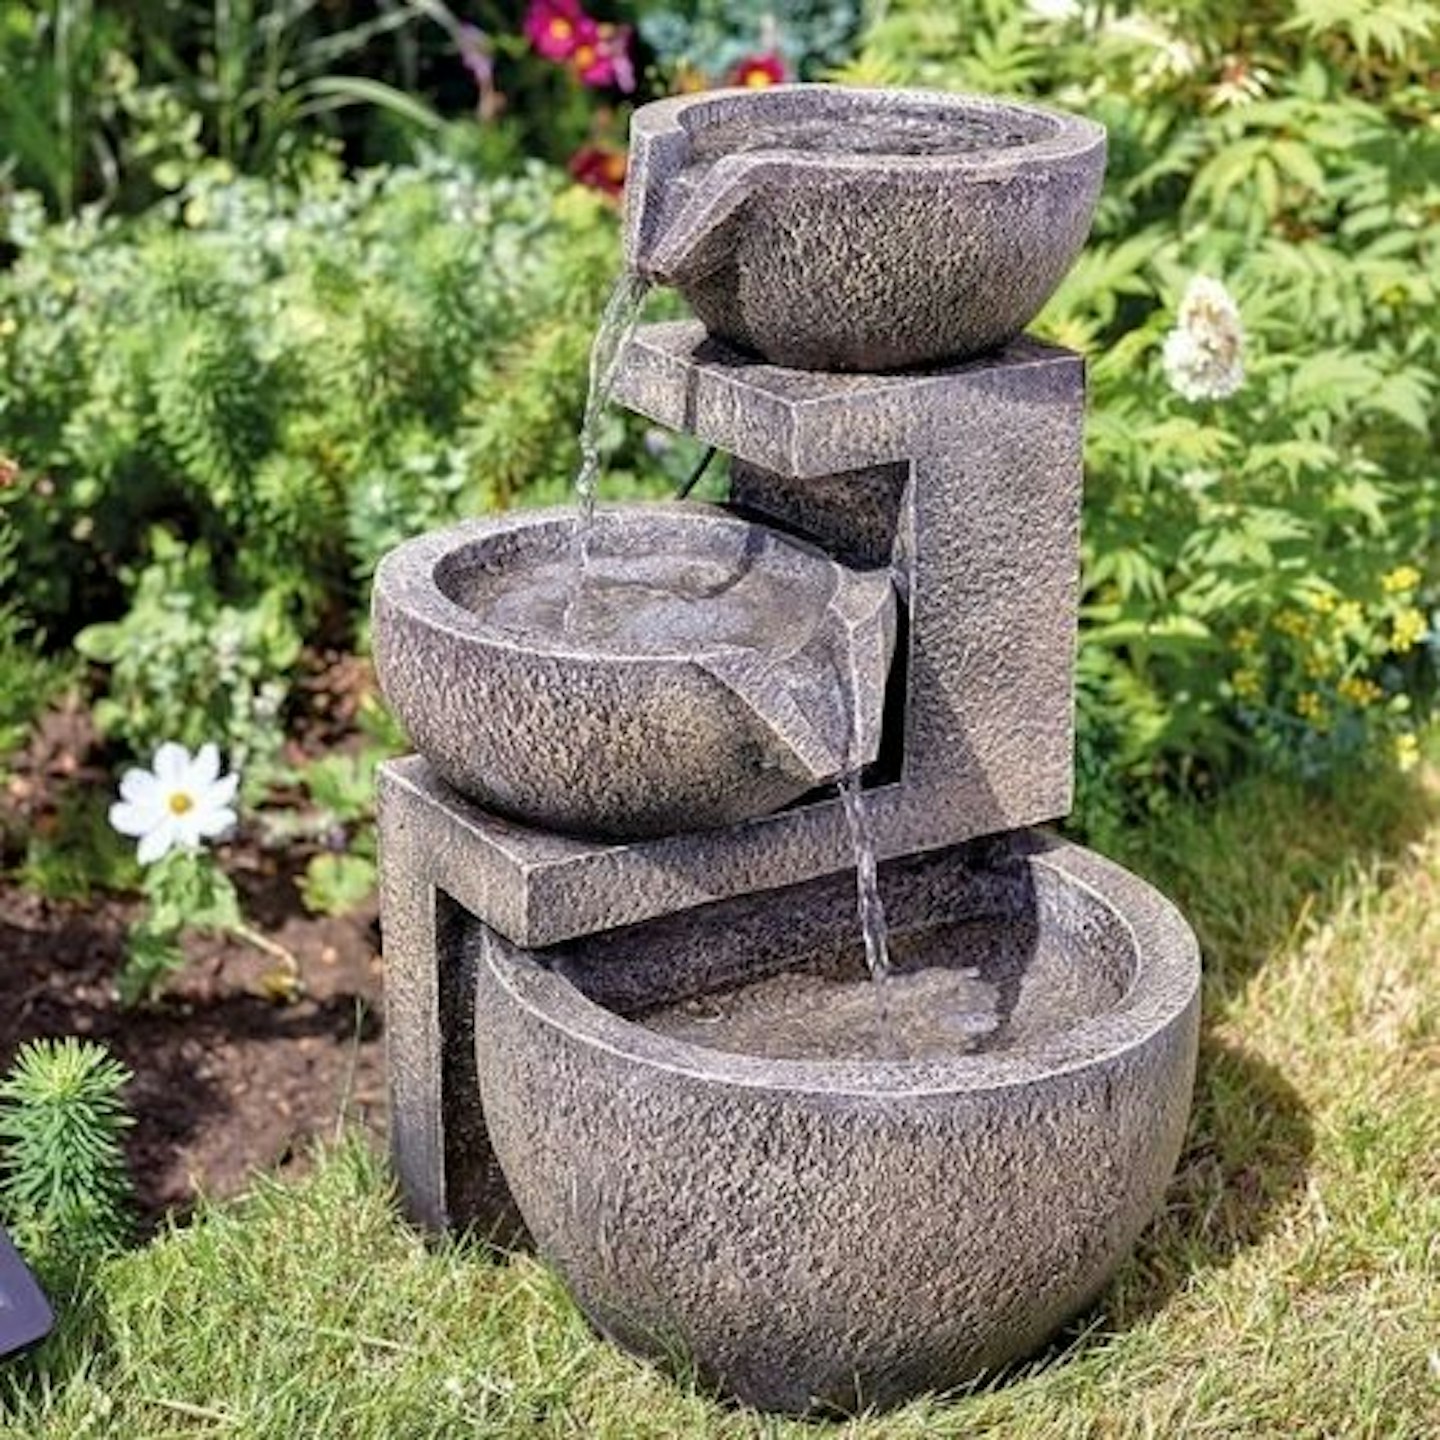 tiered water feature on grass in sunny garden